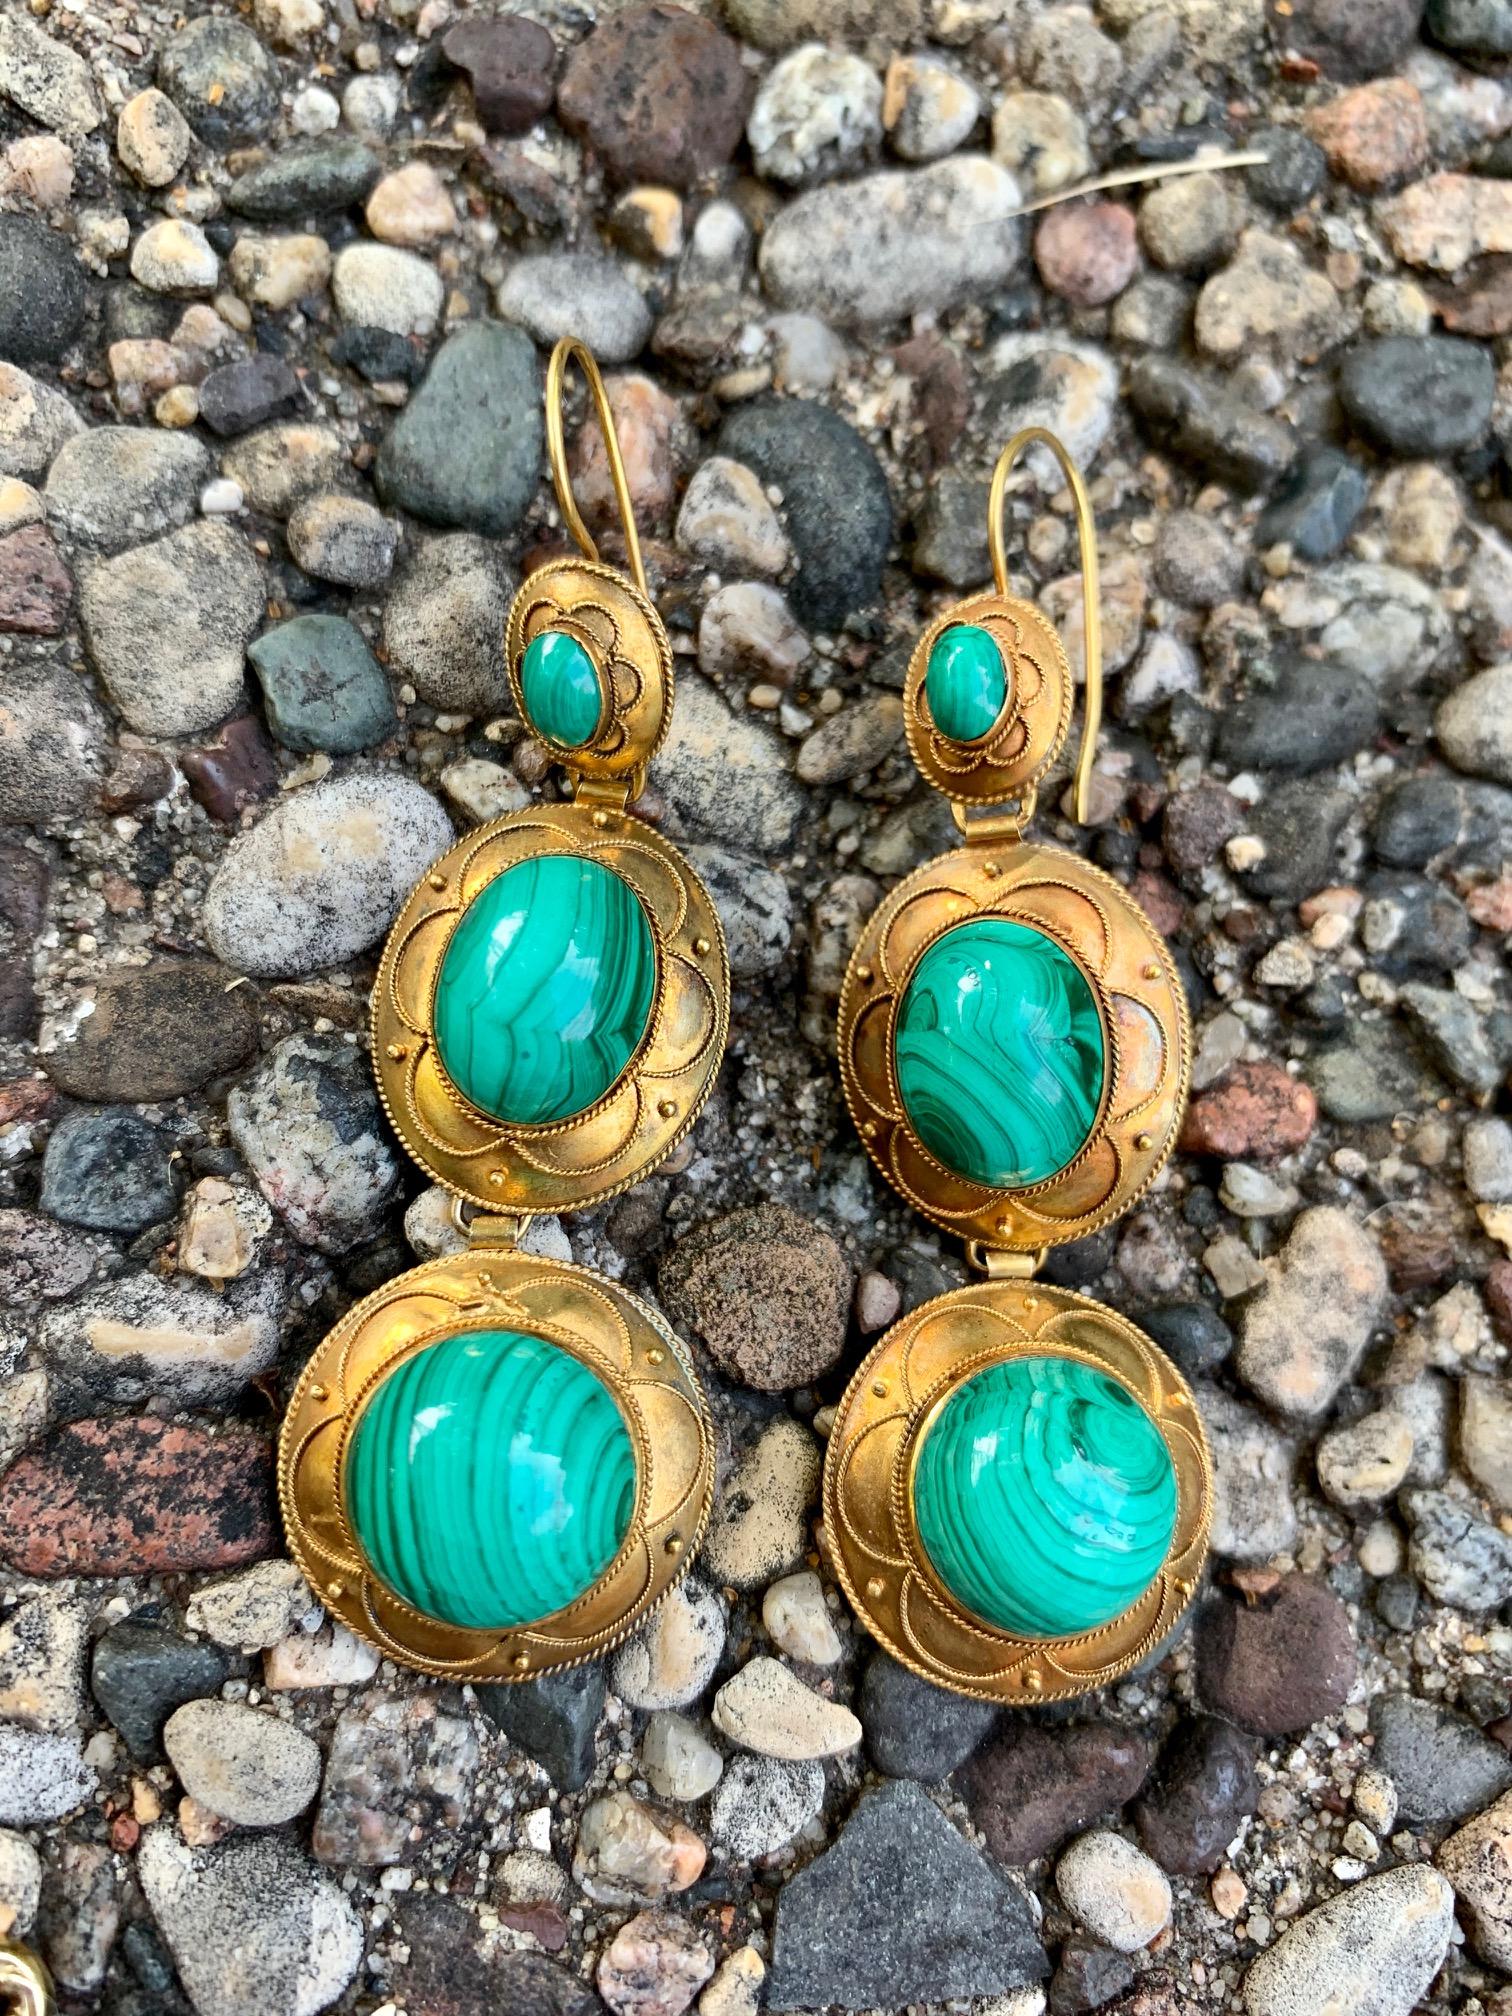 These beautiful Victorian Etruscan Revival Malachite 15k yellow God feature a total of six cabochon Malachite stones.  The ear wires are not original.

Weight: 17.2 grams

They are in excellent condition. 